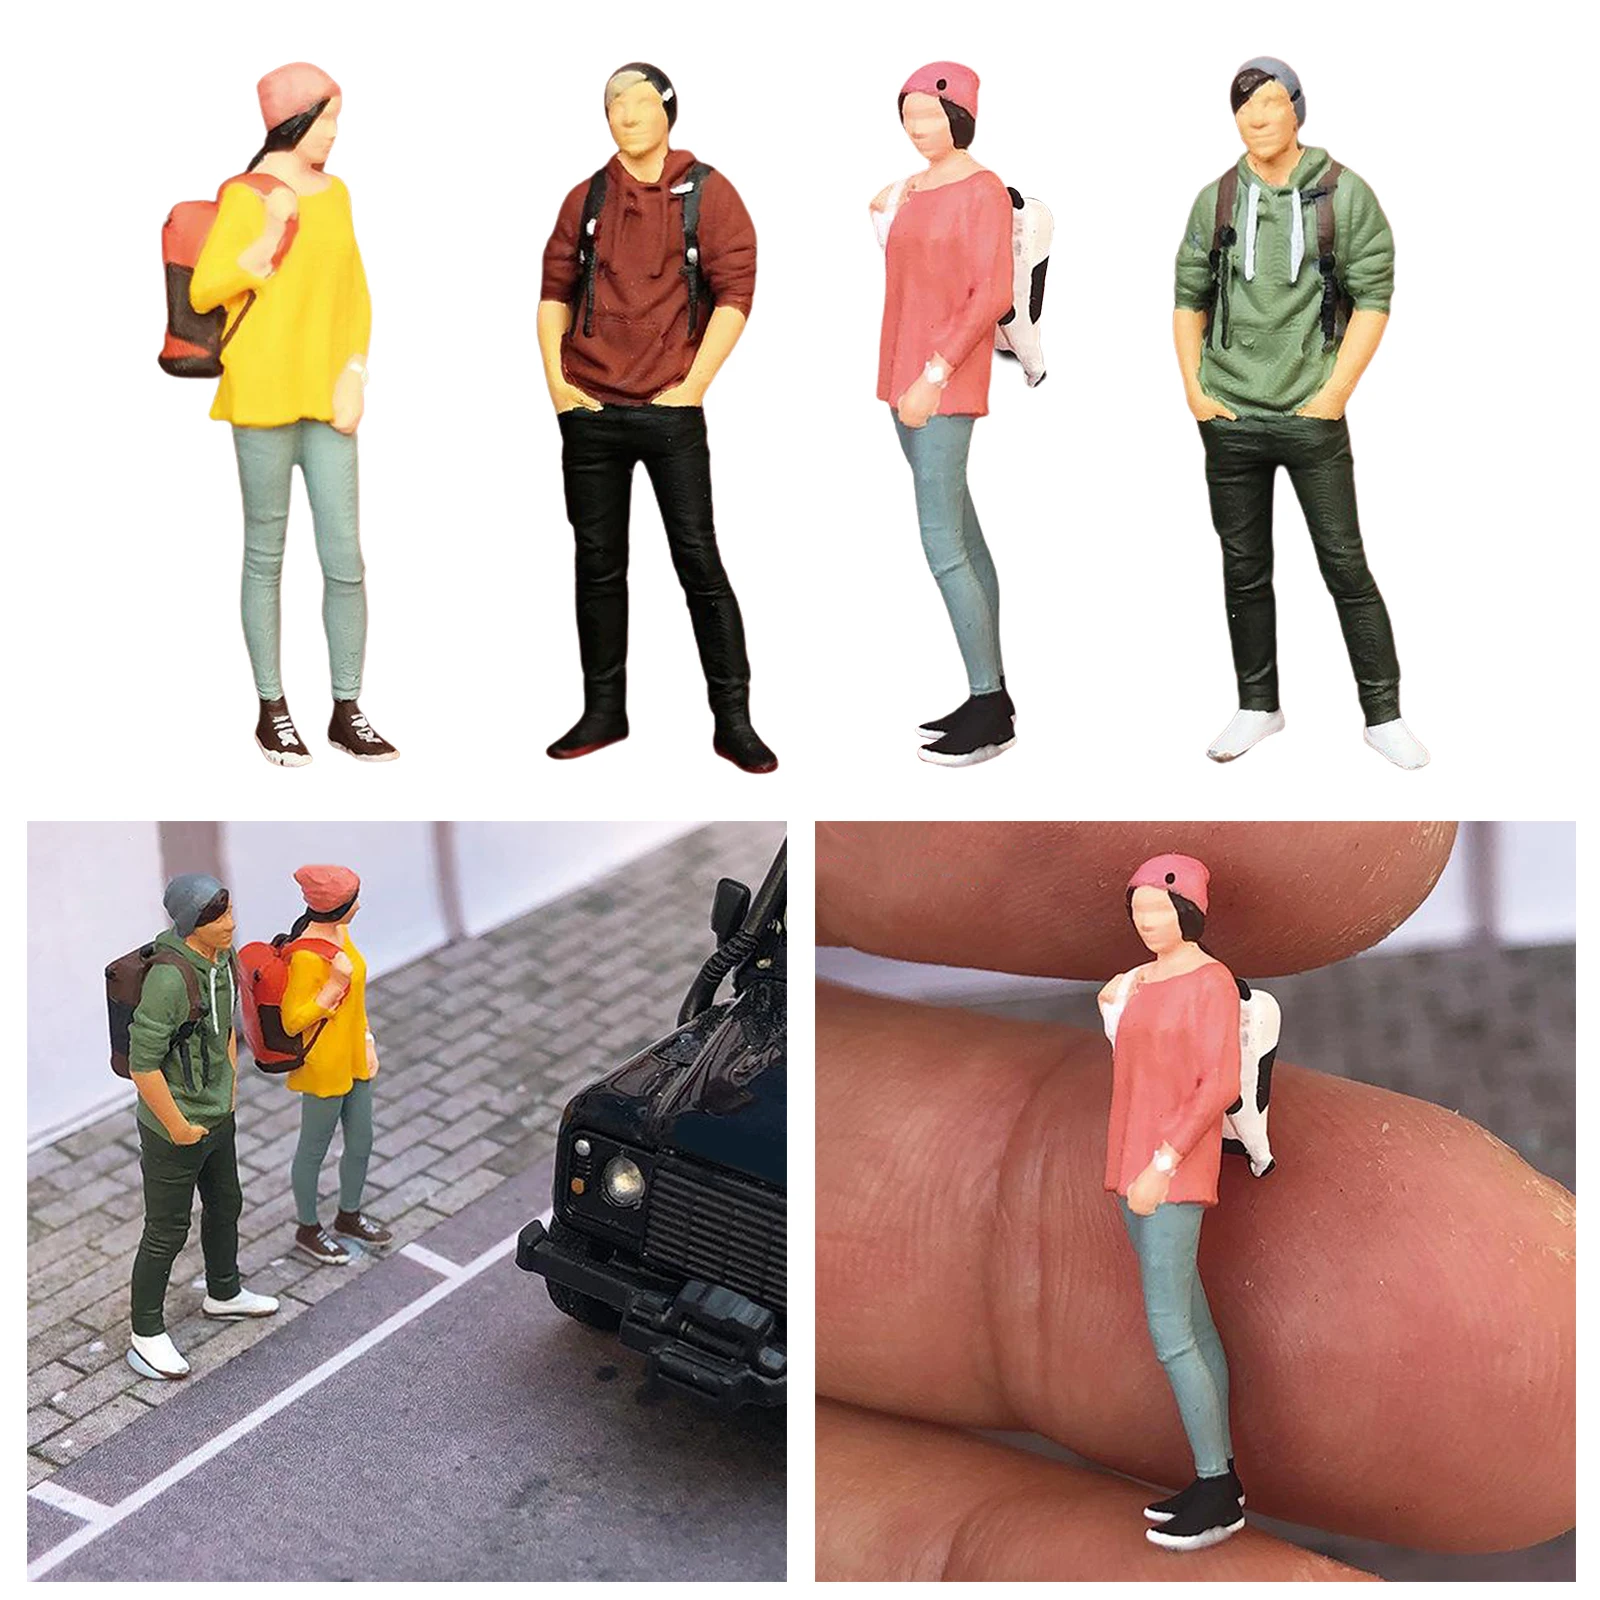 Model Gift Toys 1/64 Scale Hand Painted Resin Character Female & Male Tourist Model Race Medal Figures Realistic People Dolls